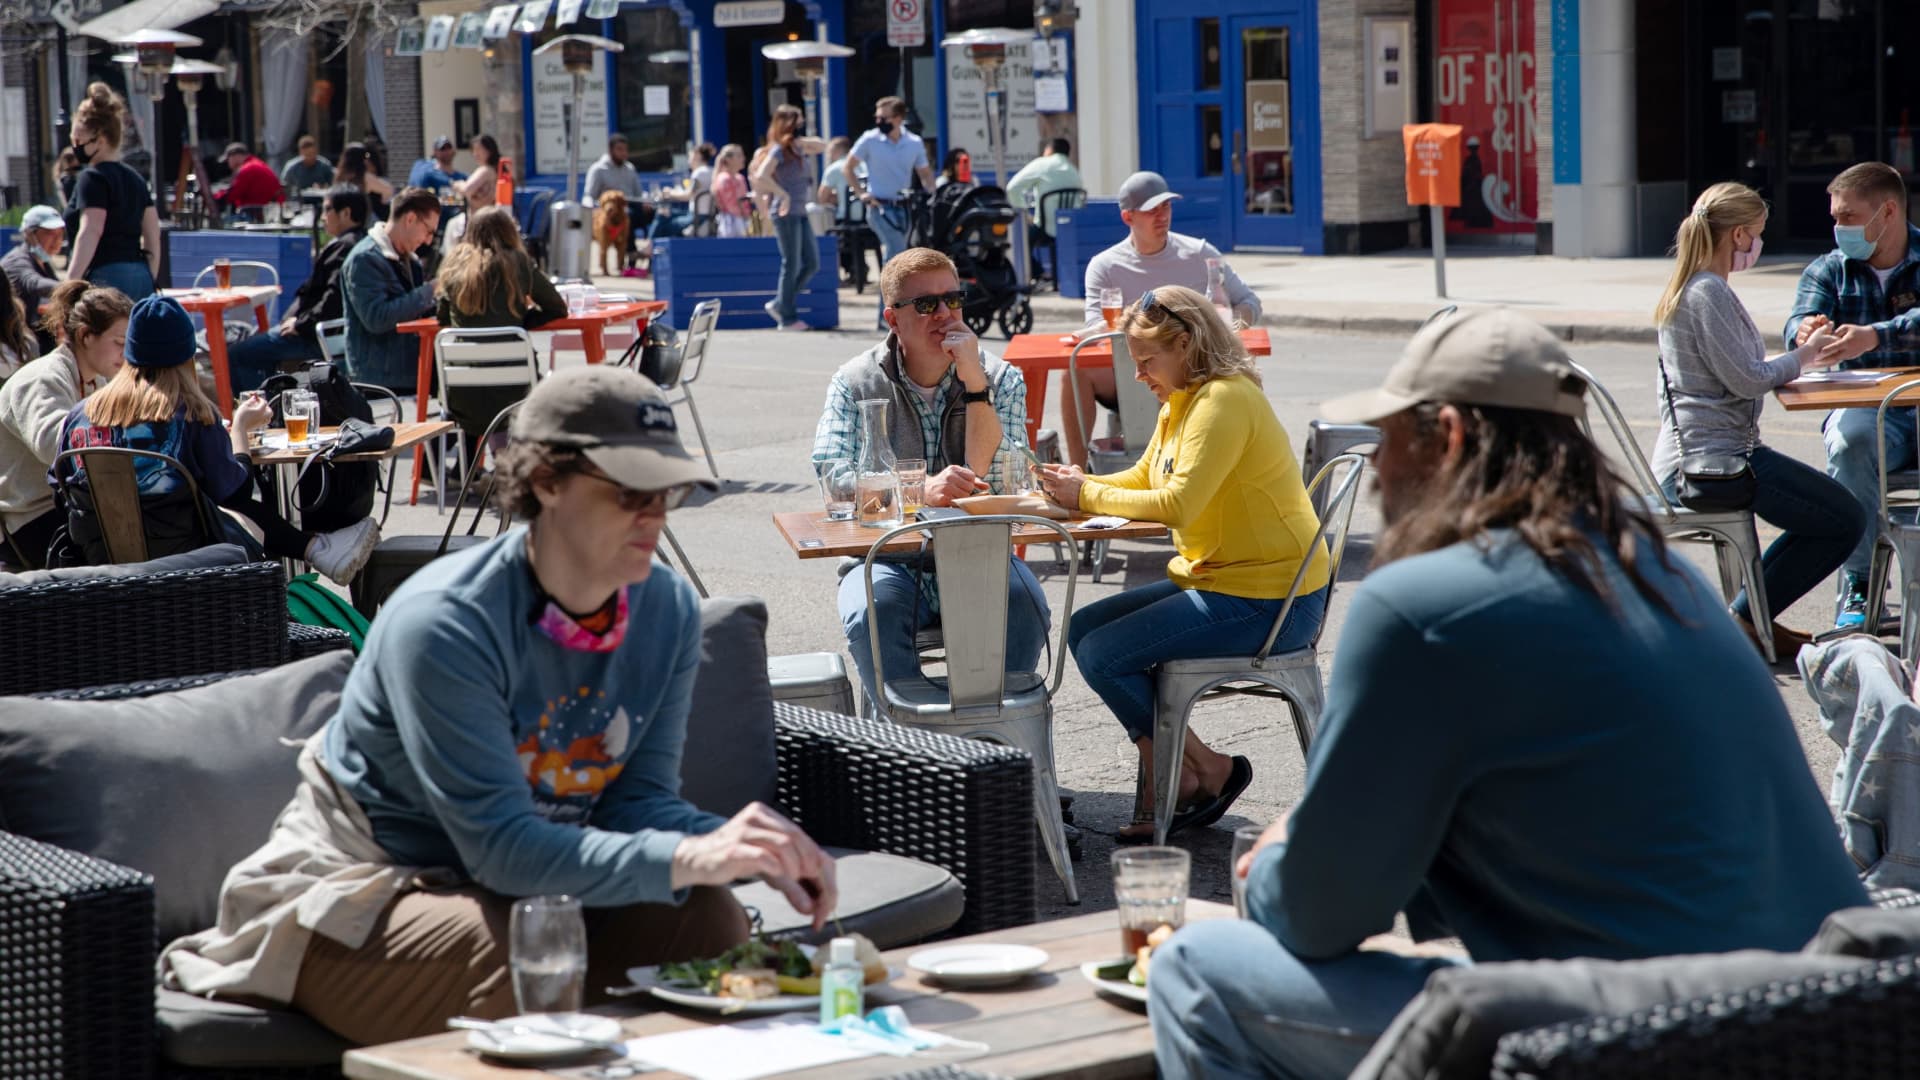 People crowd outdoor dining at a restaurant as coronavirus disease (COVID-19) restrictions are eased in Ann Arbor, Michigan, U.S., April 4, 2021.